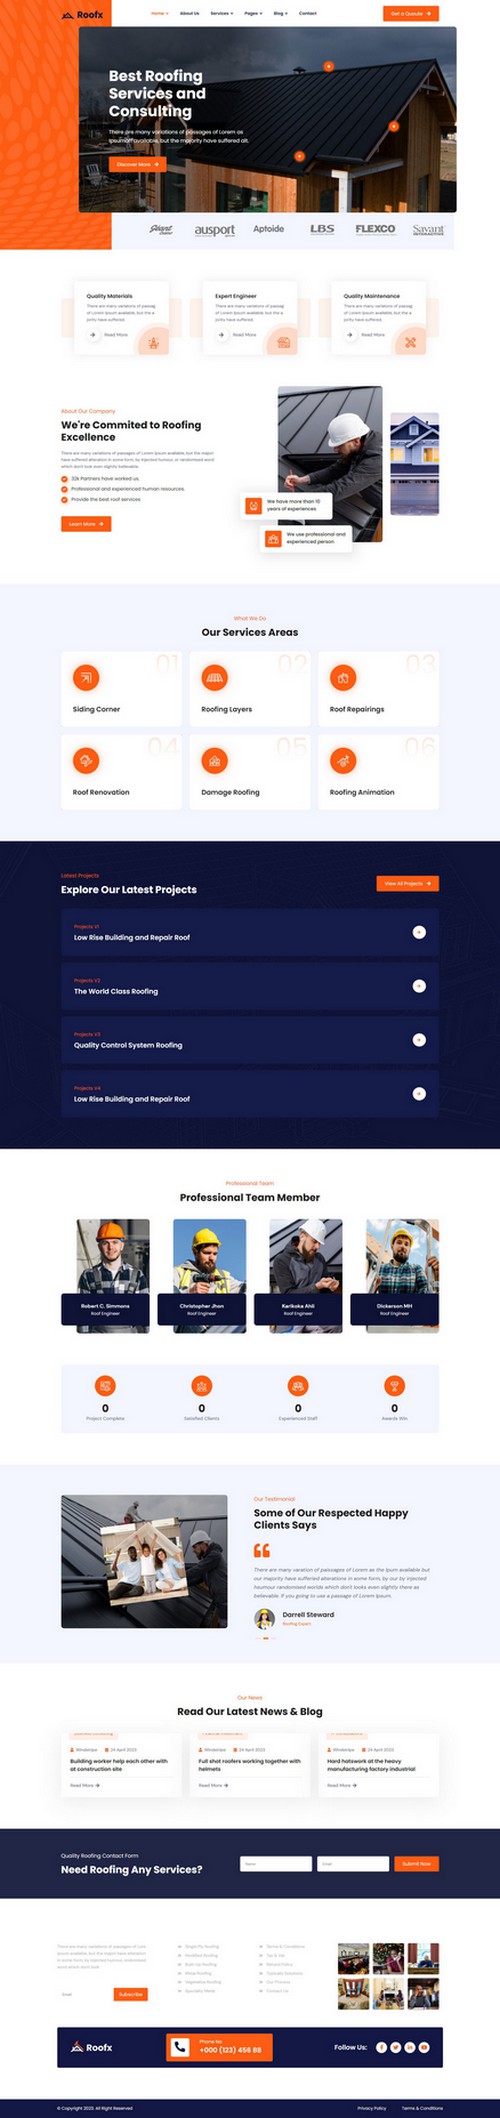 Roofx - Professional Roofing Services Joomla Template